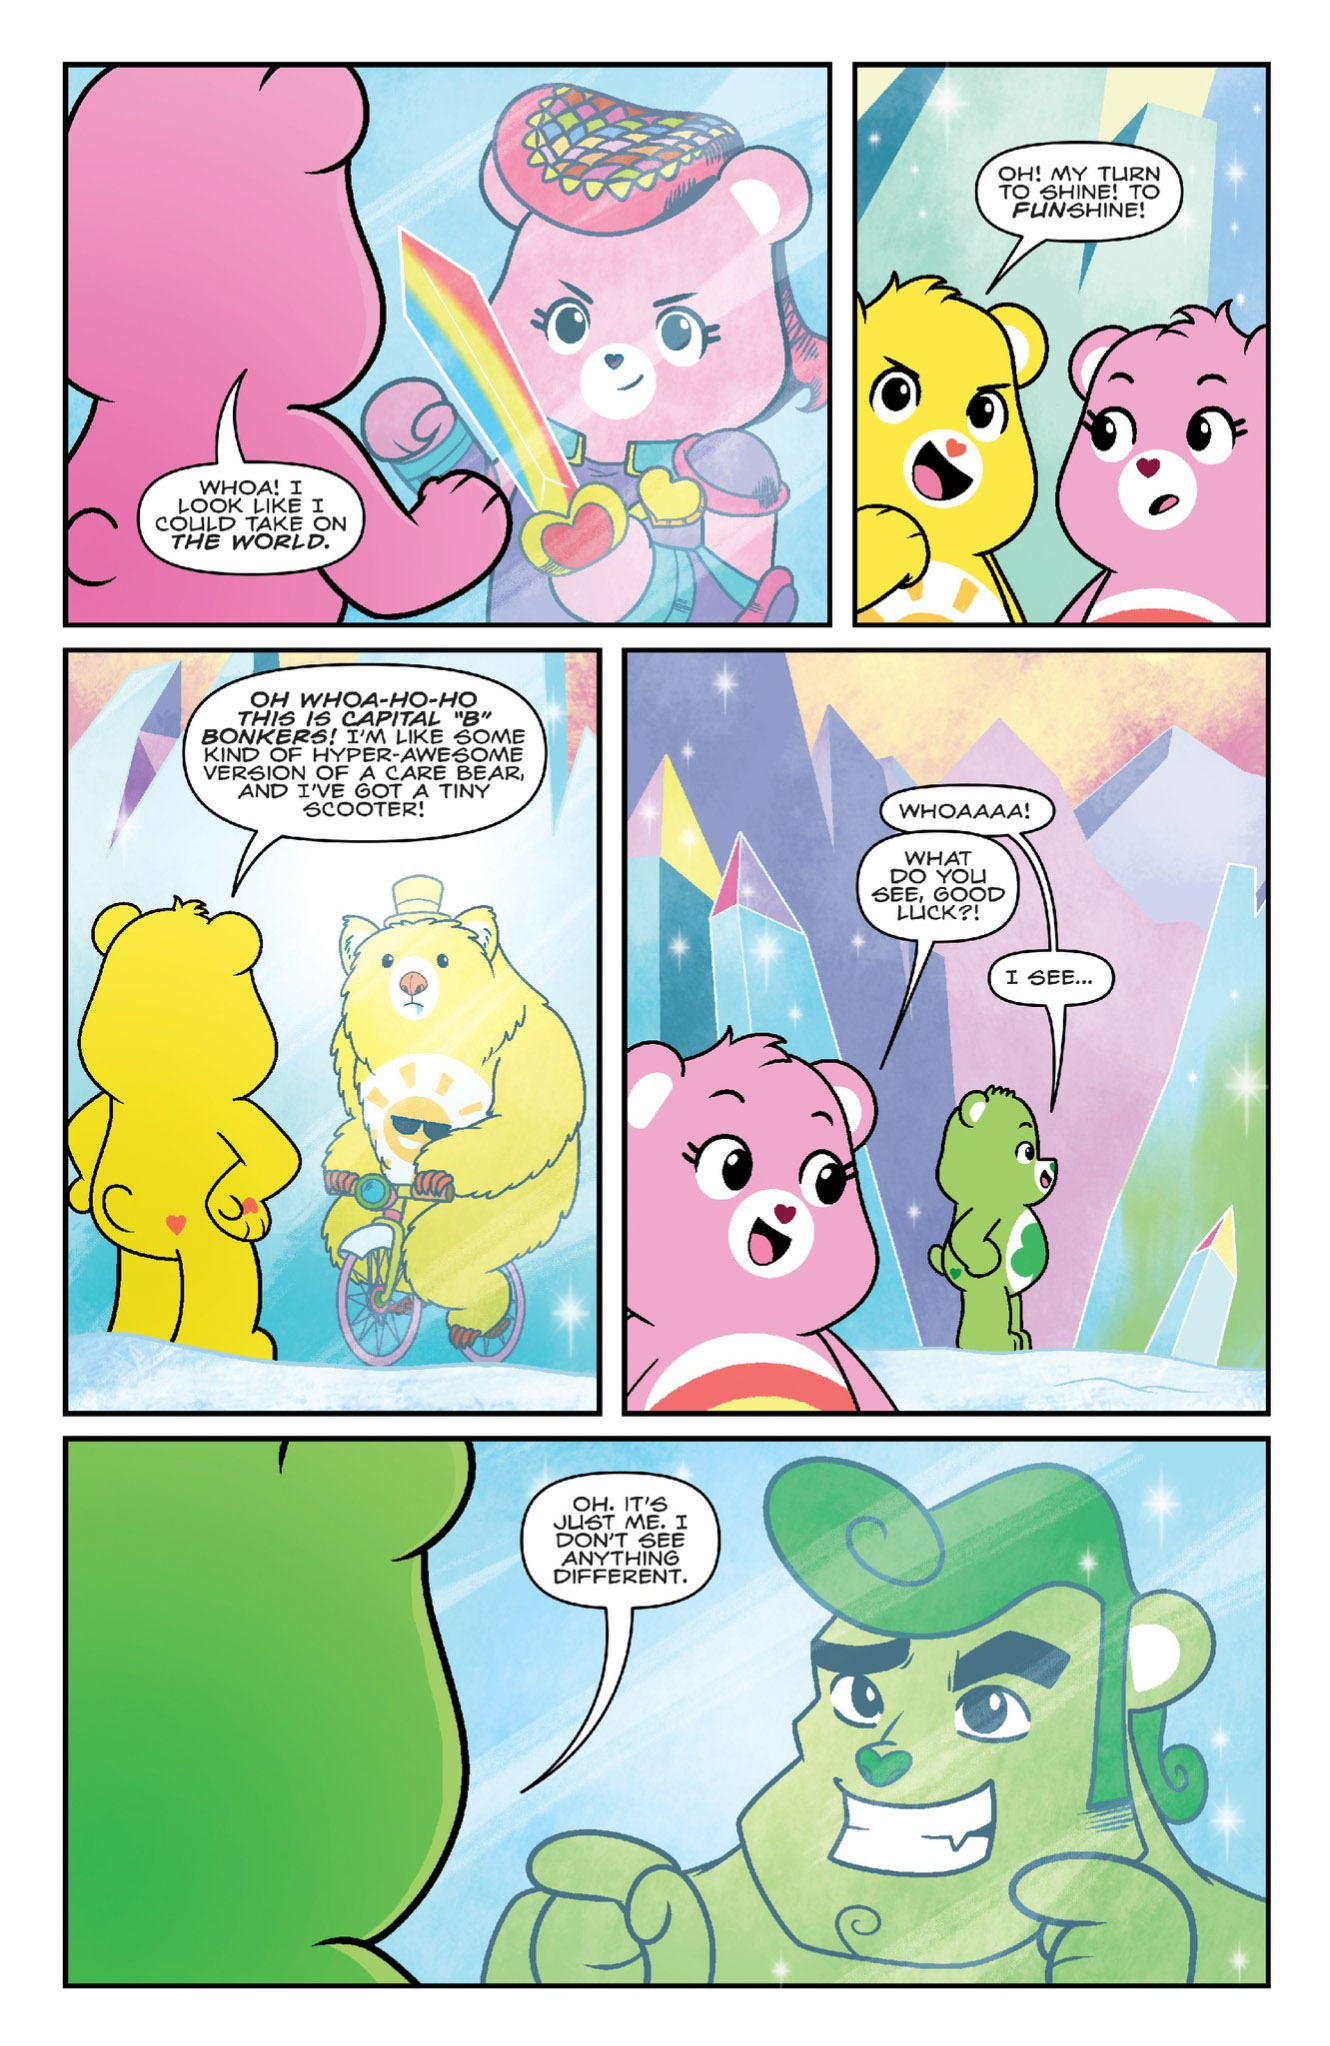 different care bears